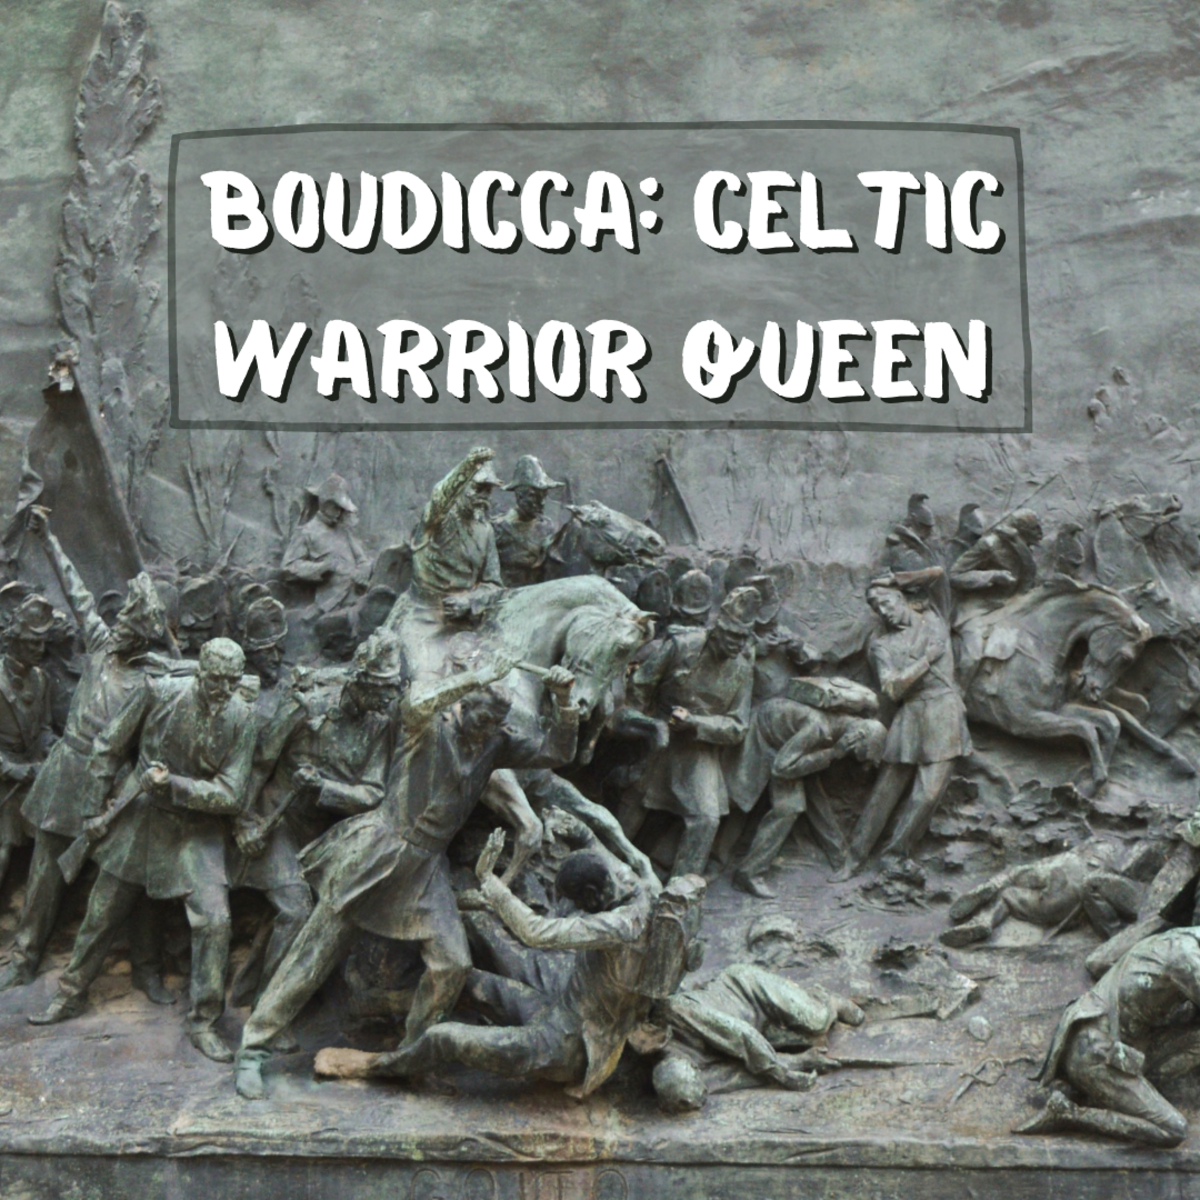 Take an in-depth look into the life, history, and impact of Boudicca, the Celtic queen who revolted against the Roman army in southwest England in 60 AD.